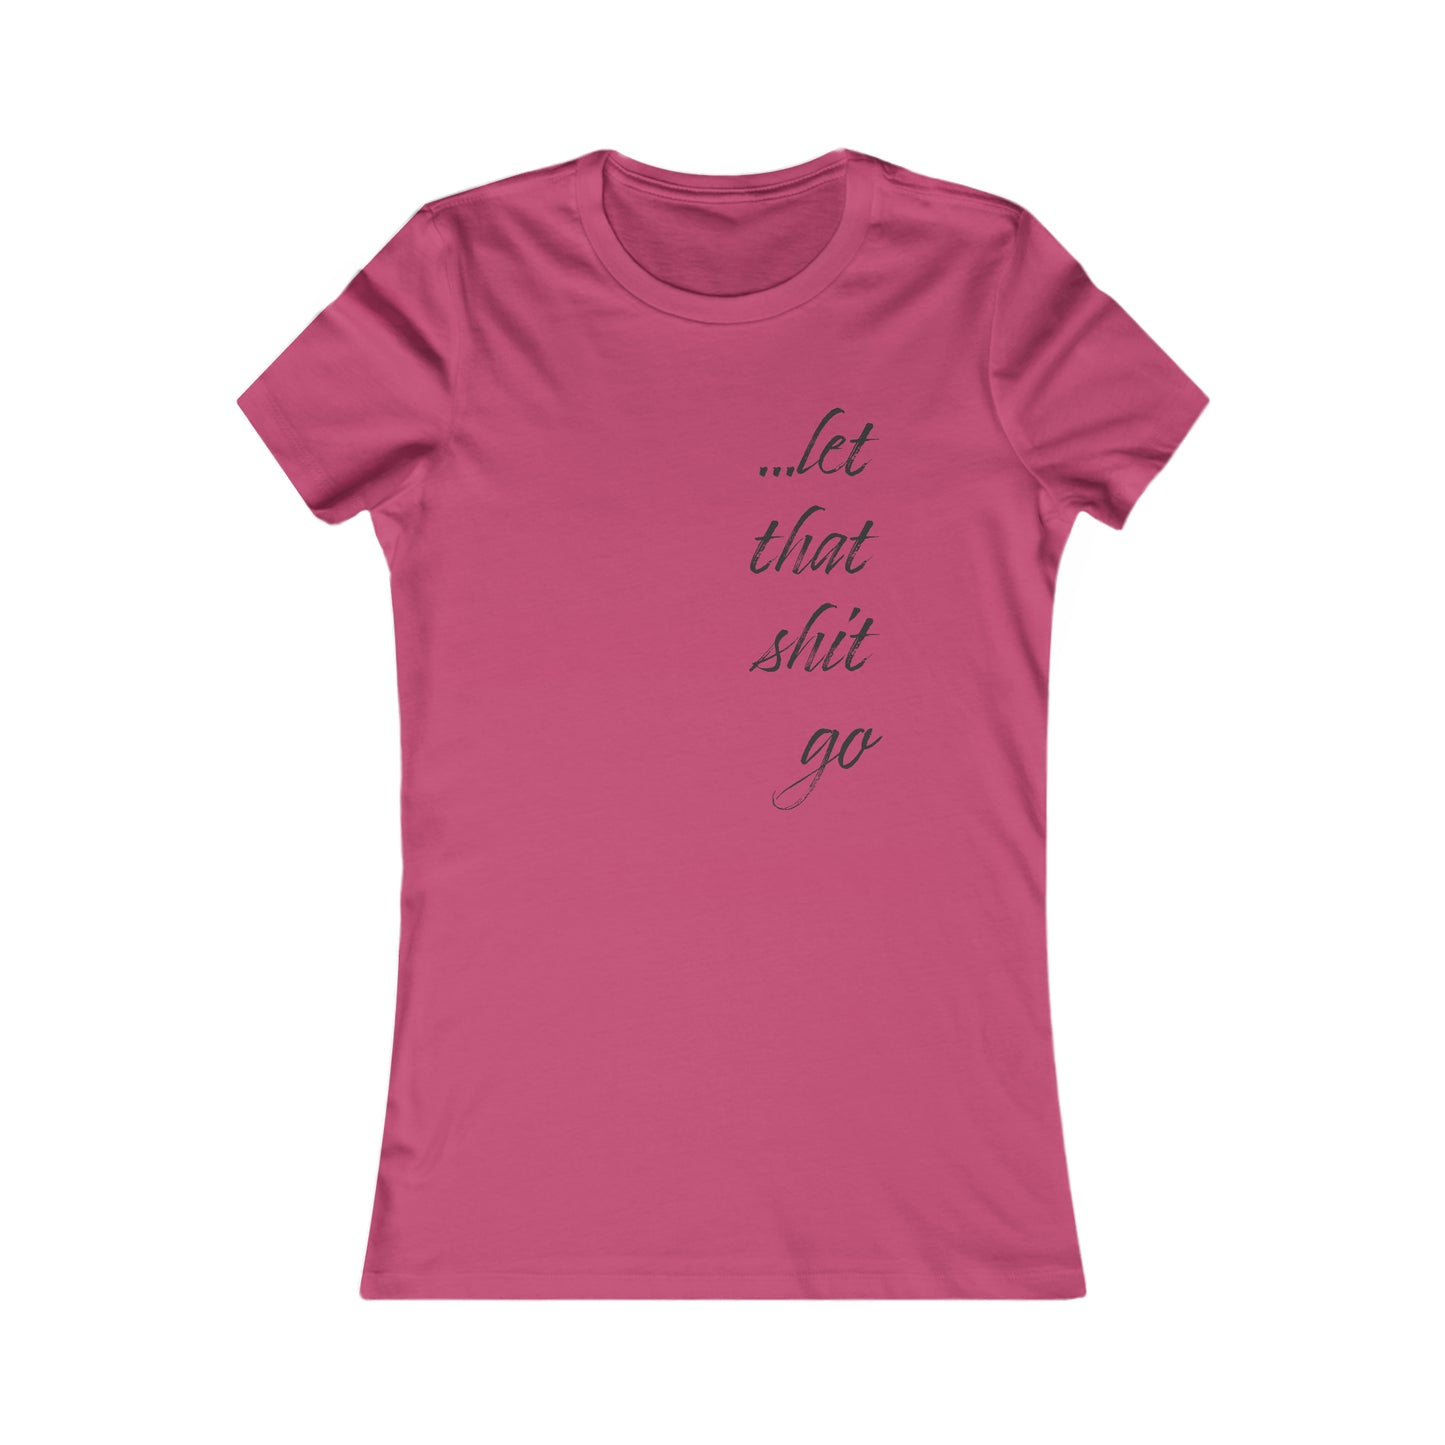 Funny Zen T-Shirt For Relax T Shirt For Let It Go TShirt For Sarcastic Yoga Shirt For Silly Gift For Her